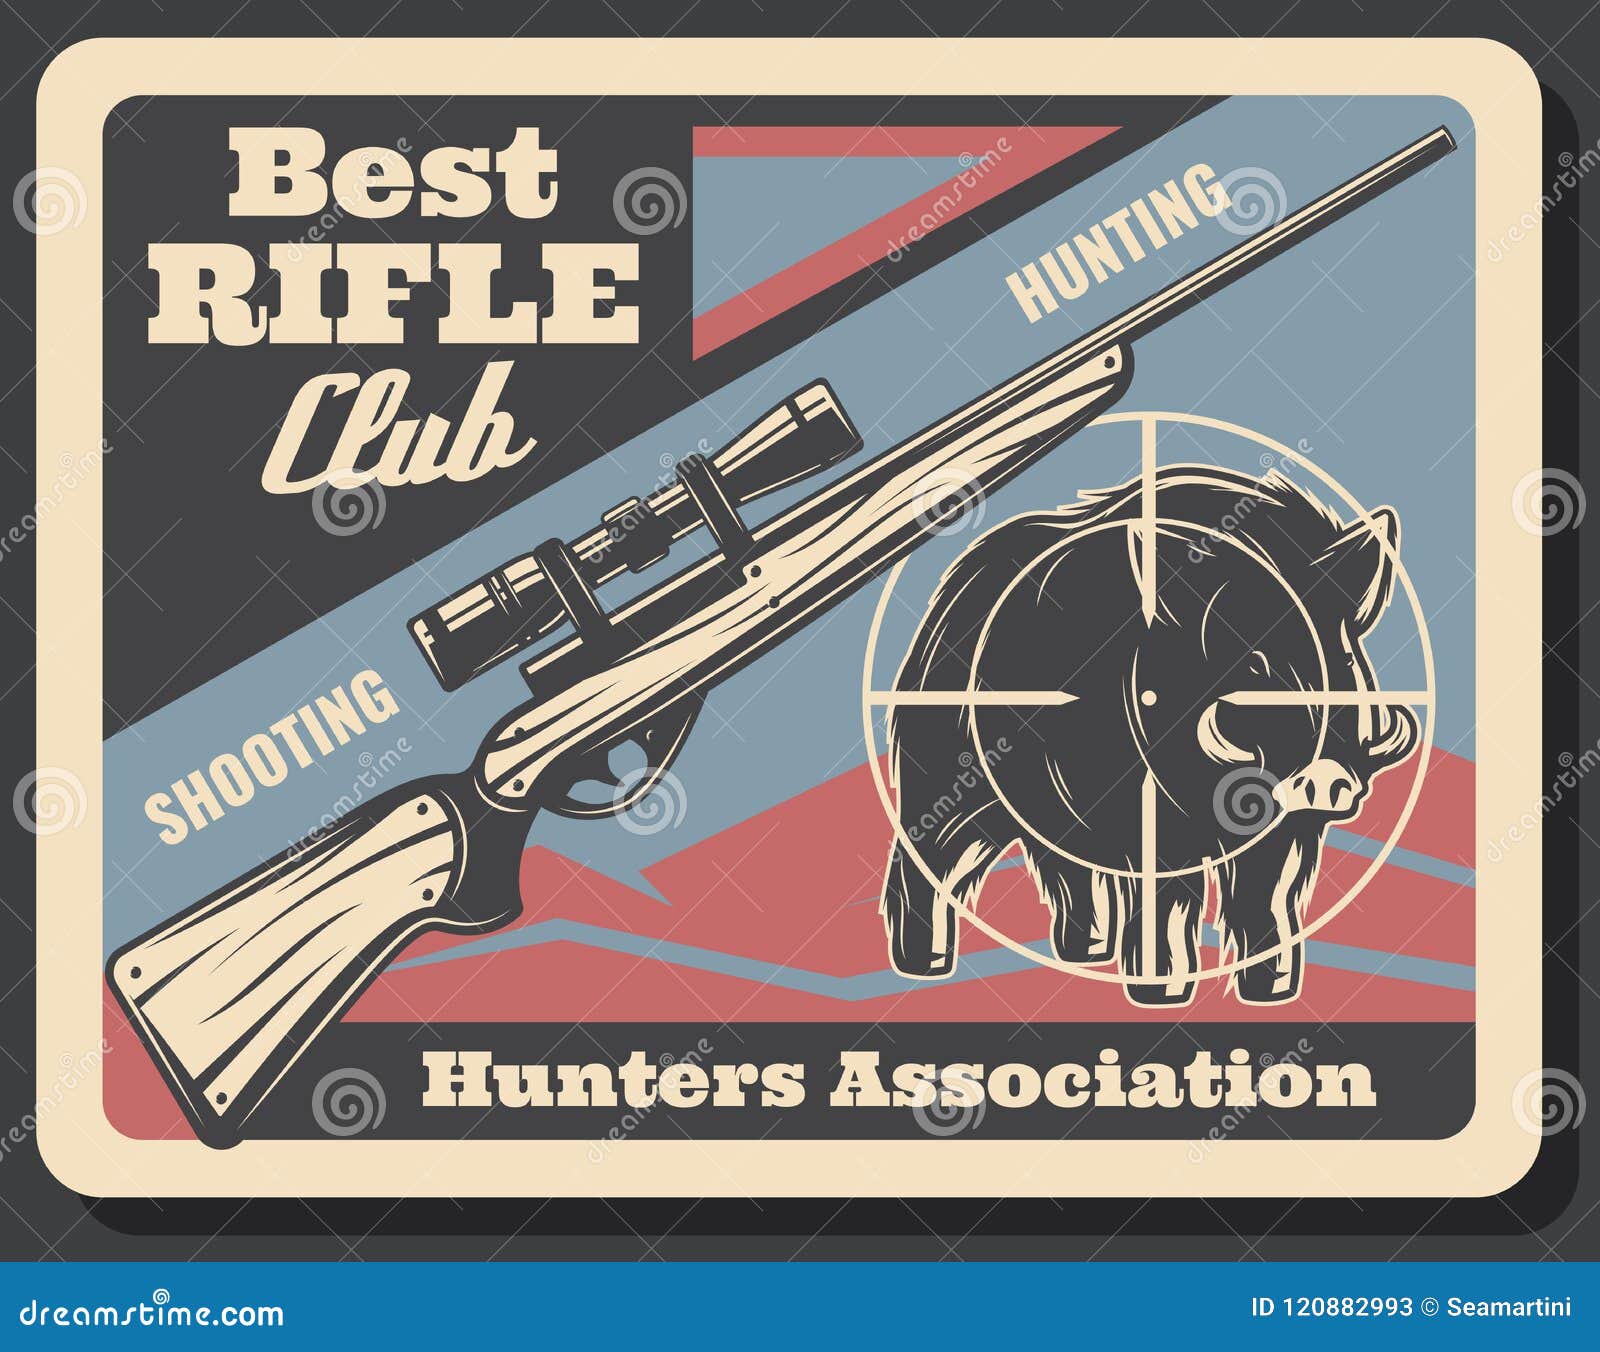 Who are the hunters in the Hunter Association picture on the